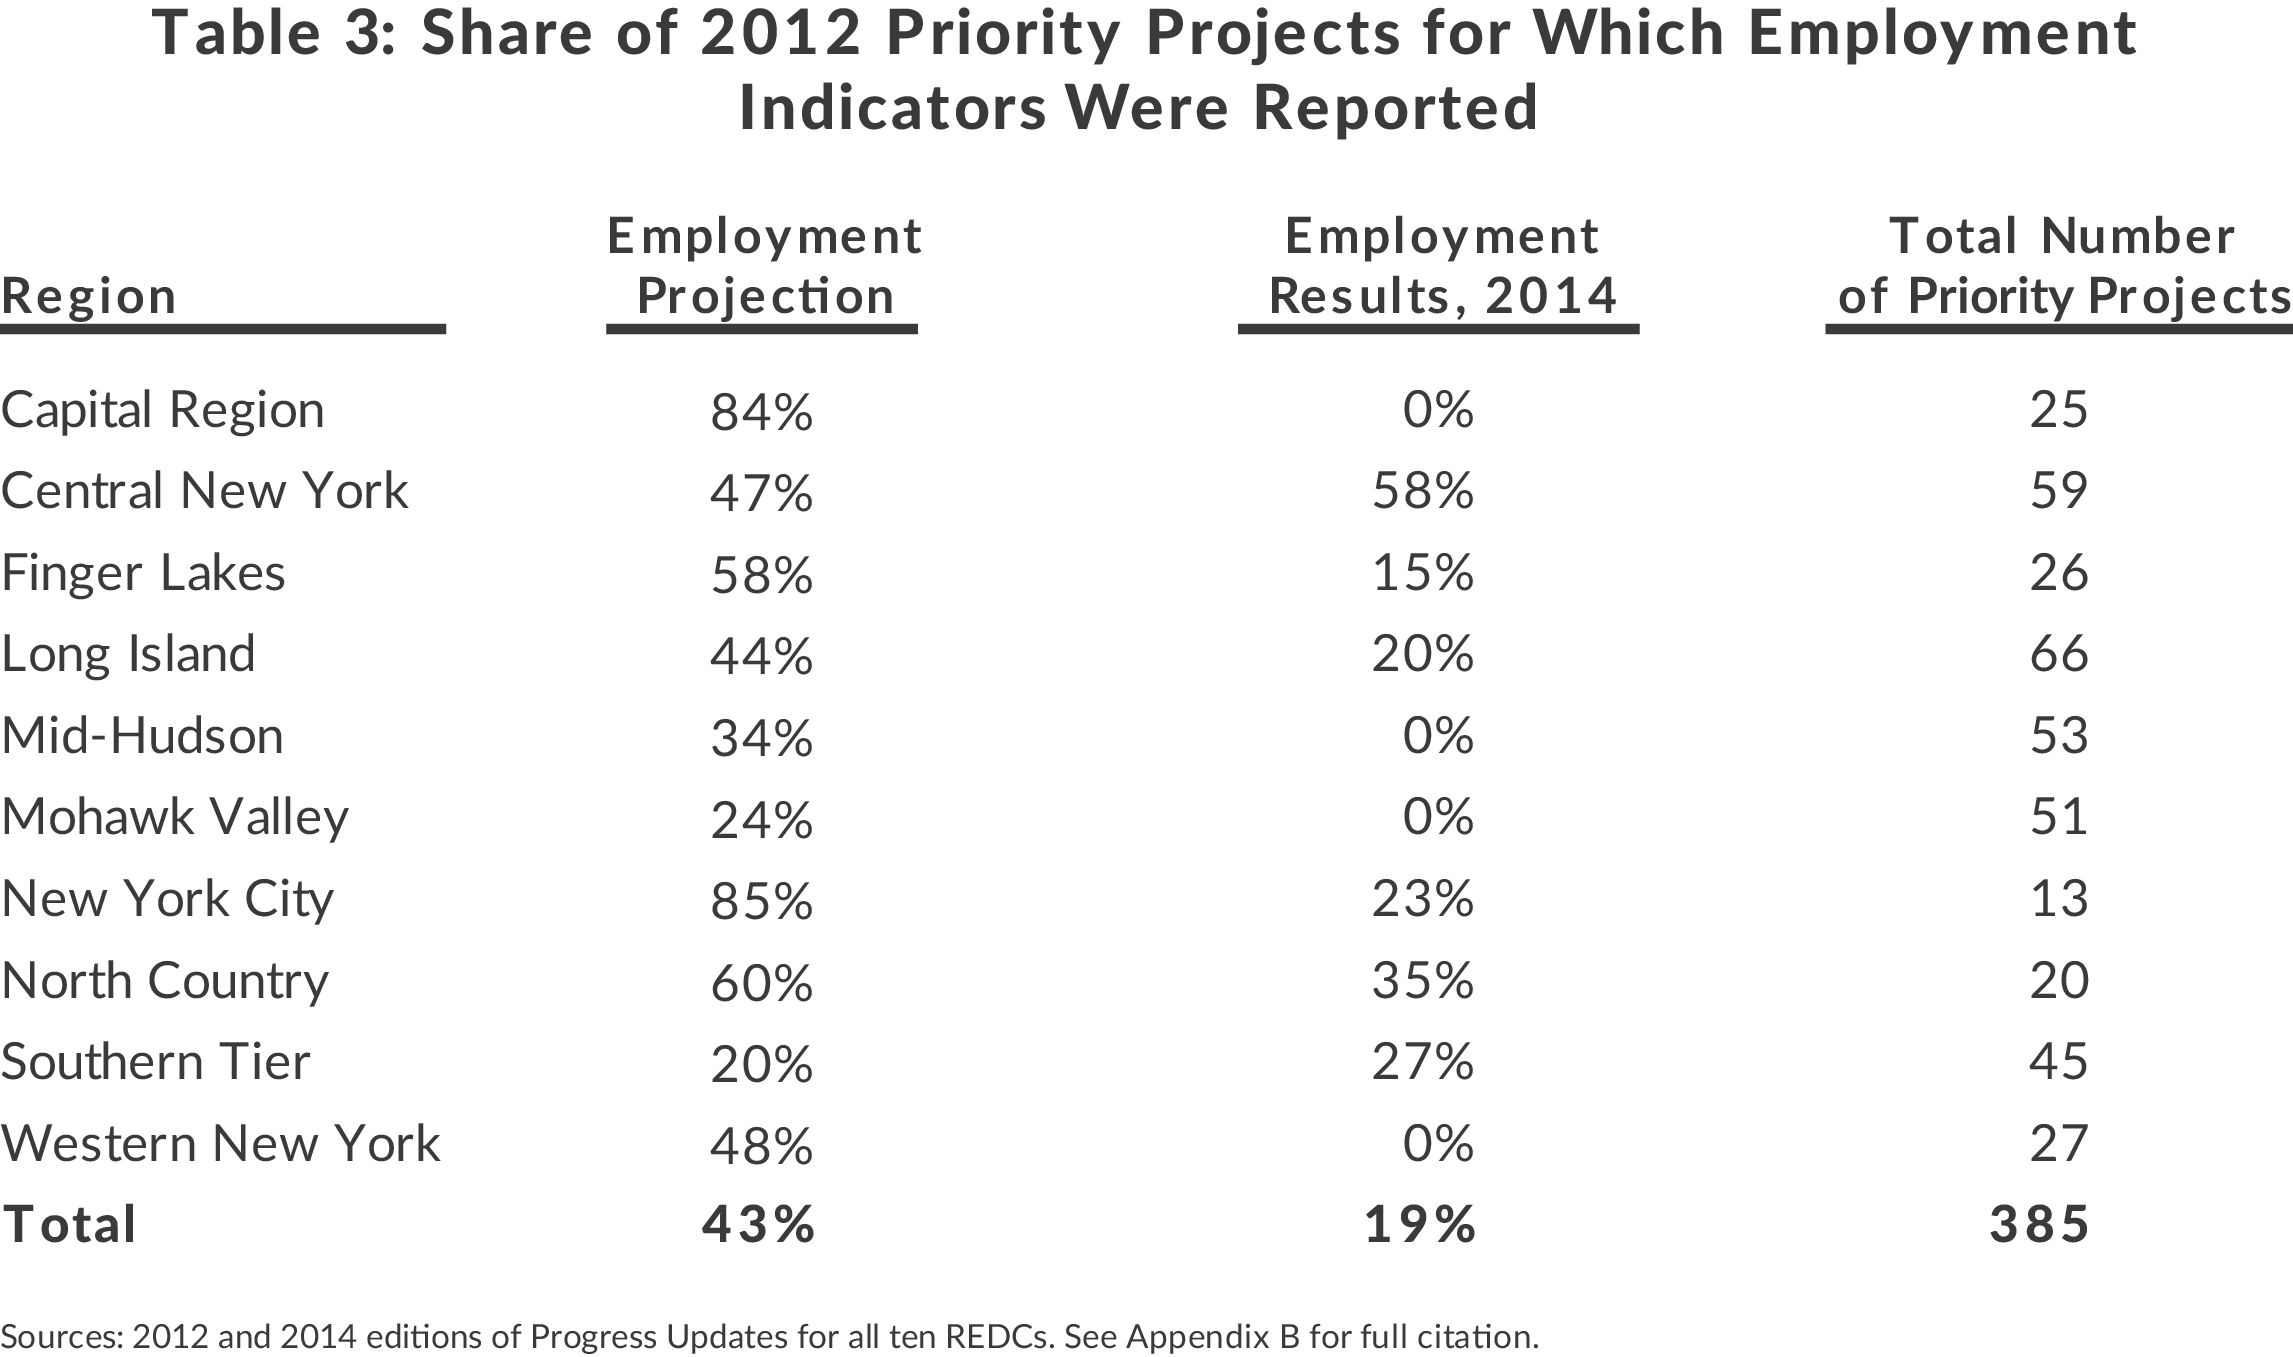 Table showing share of 2012 priority projects with employment indicators report by Regional Economic Development Council